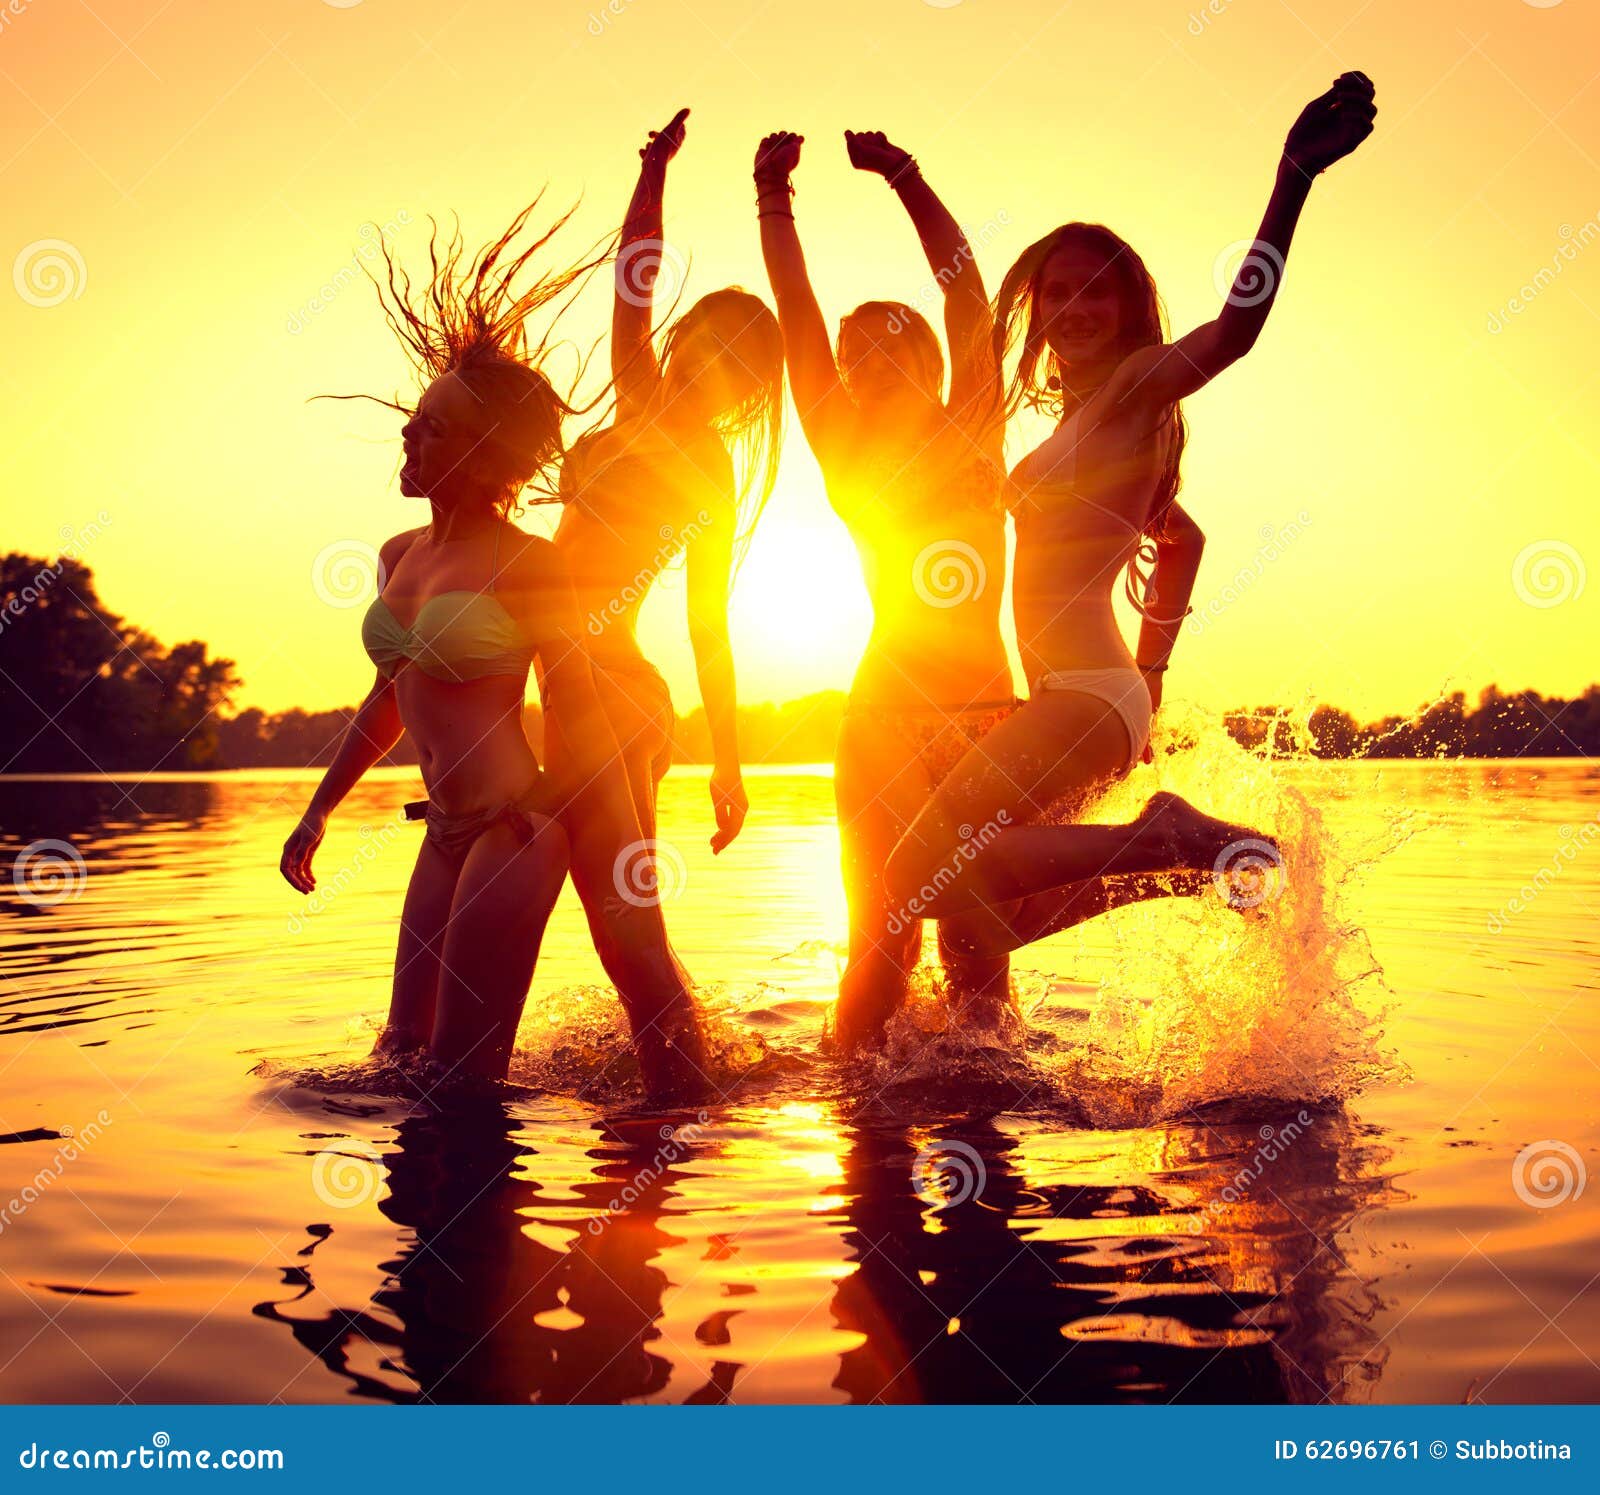 beach party. happy girls in water over sunset